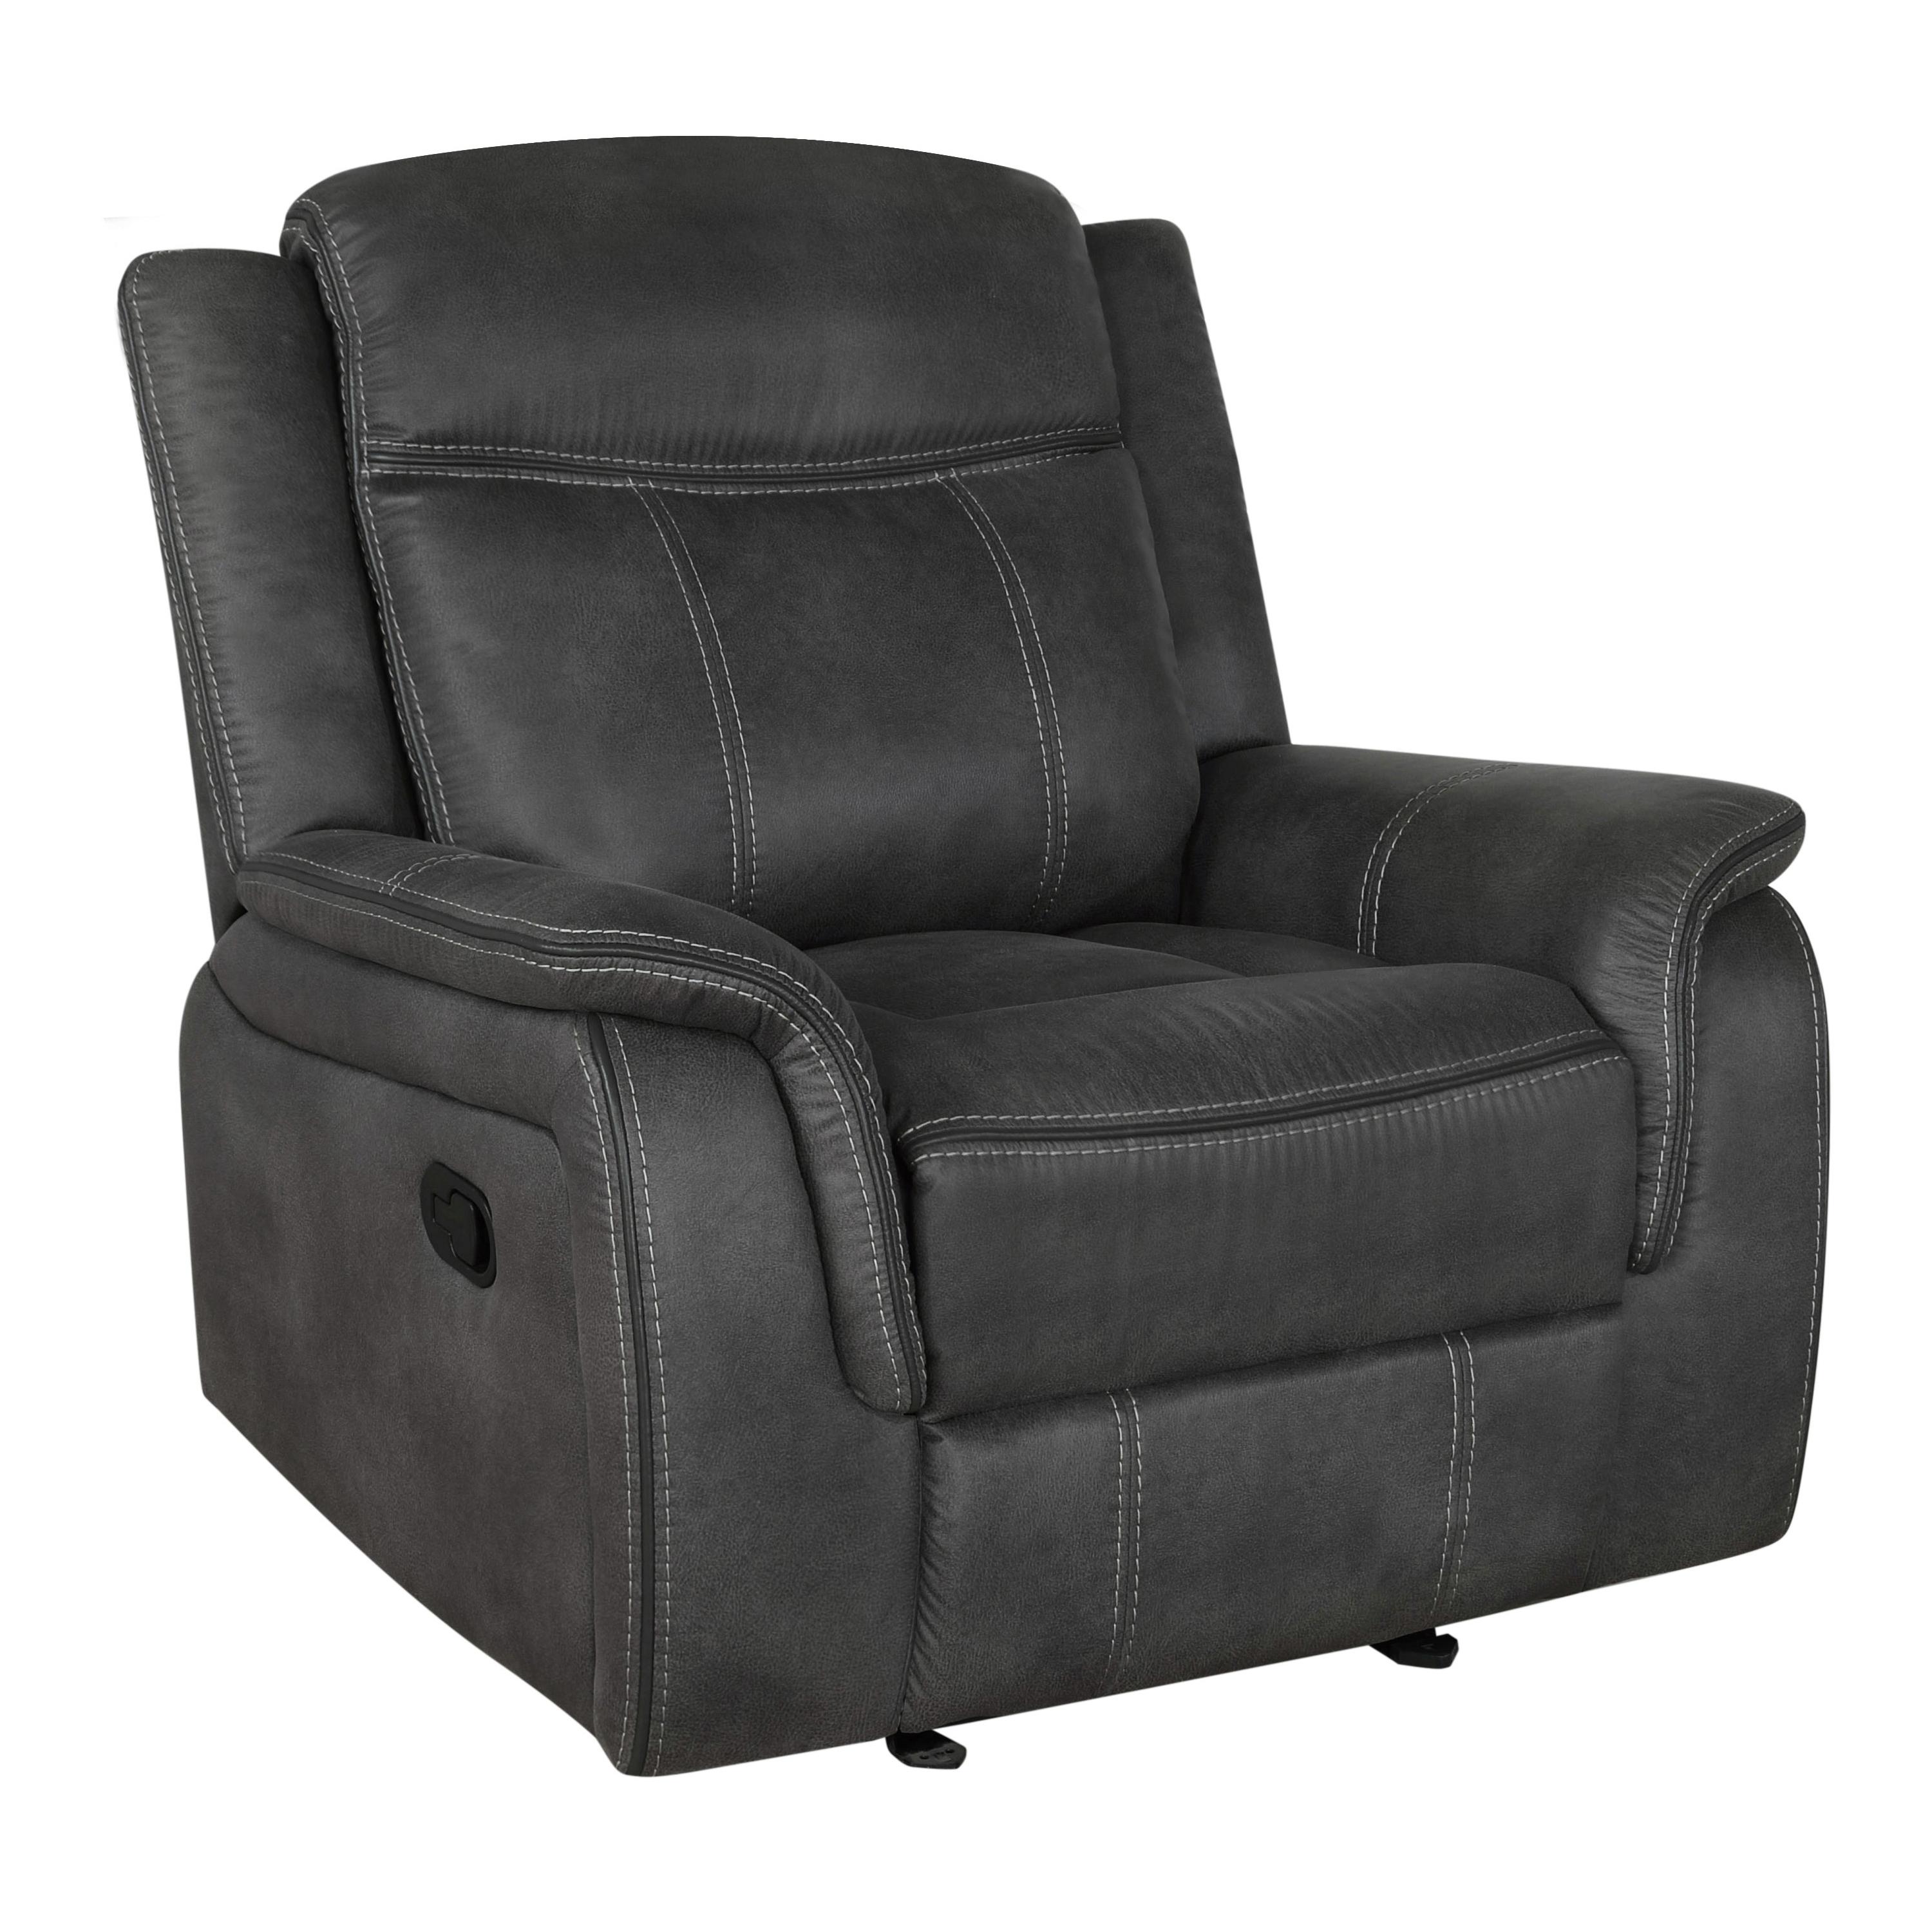 Transitional Glider recliner 603506 Lawrence 603506 in Charcoal 